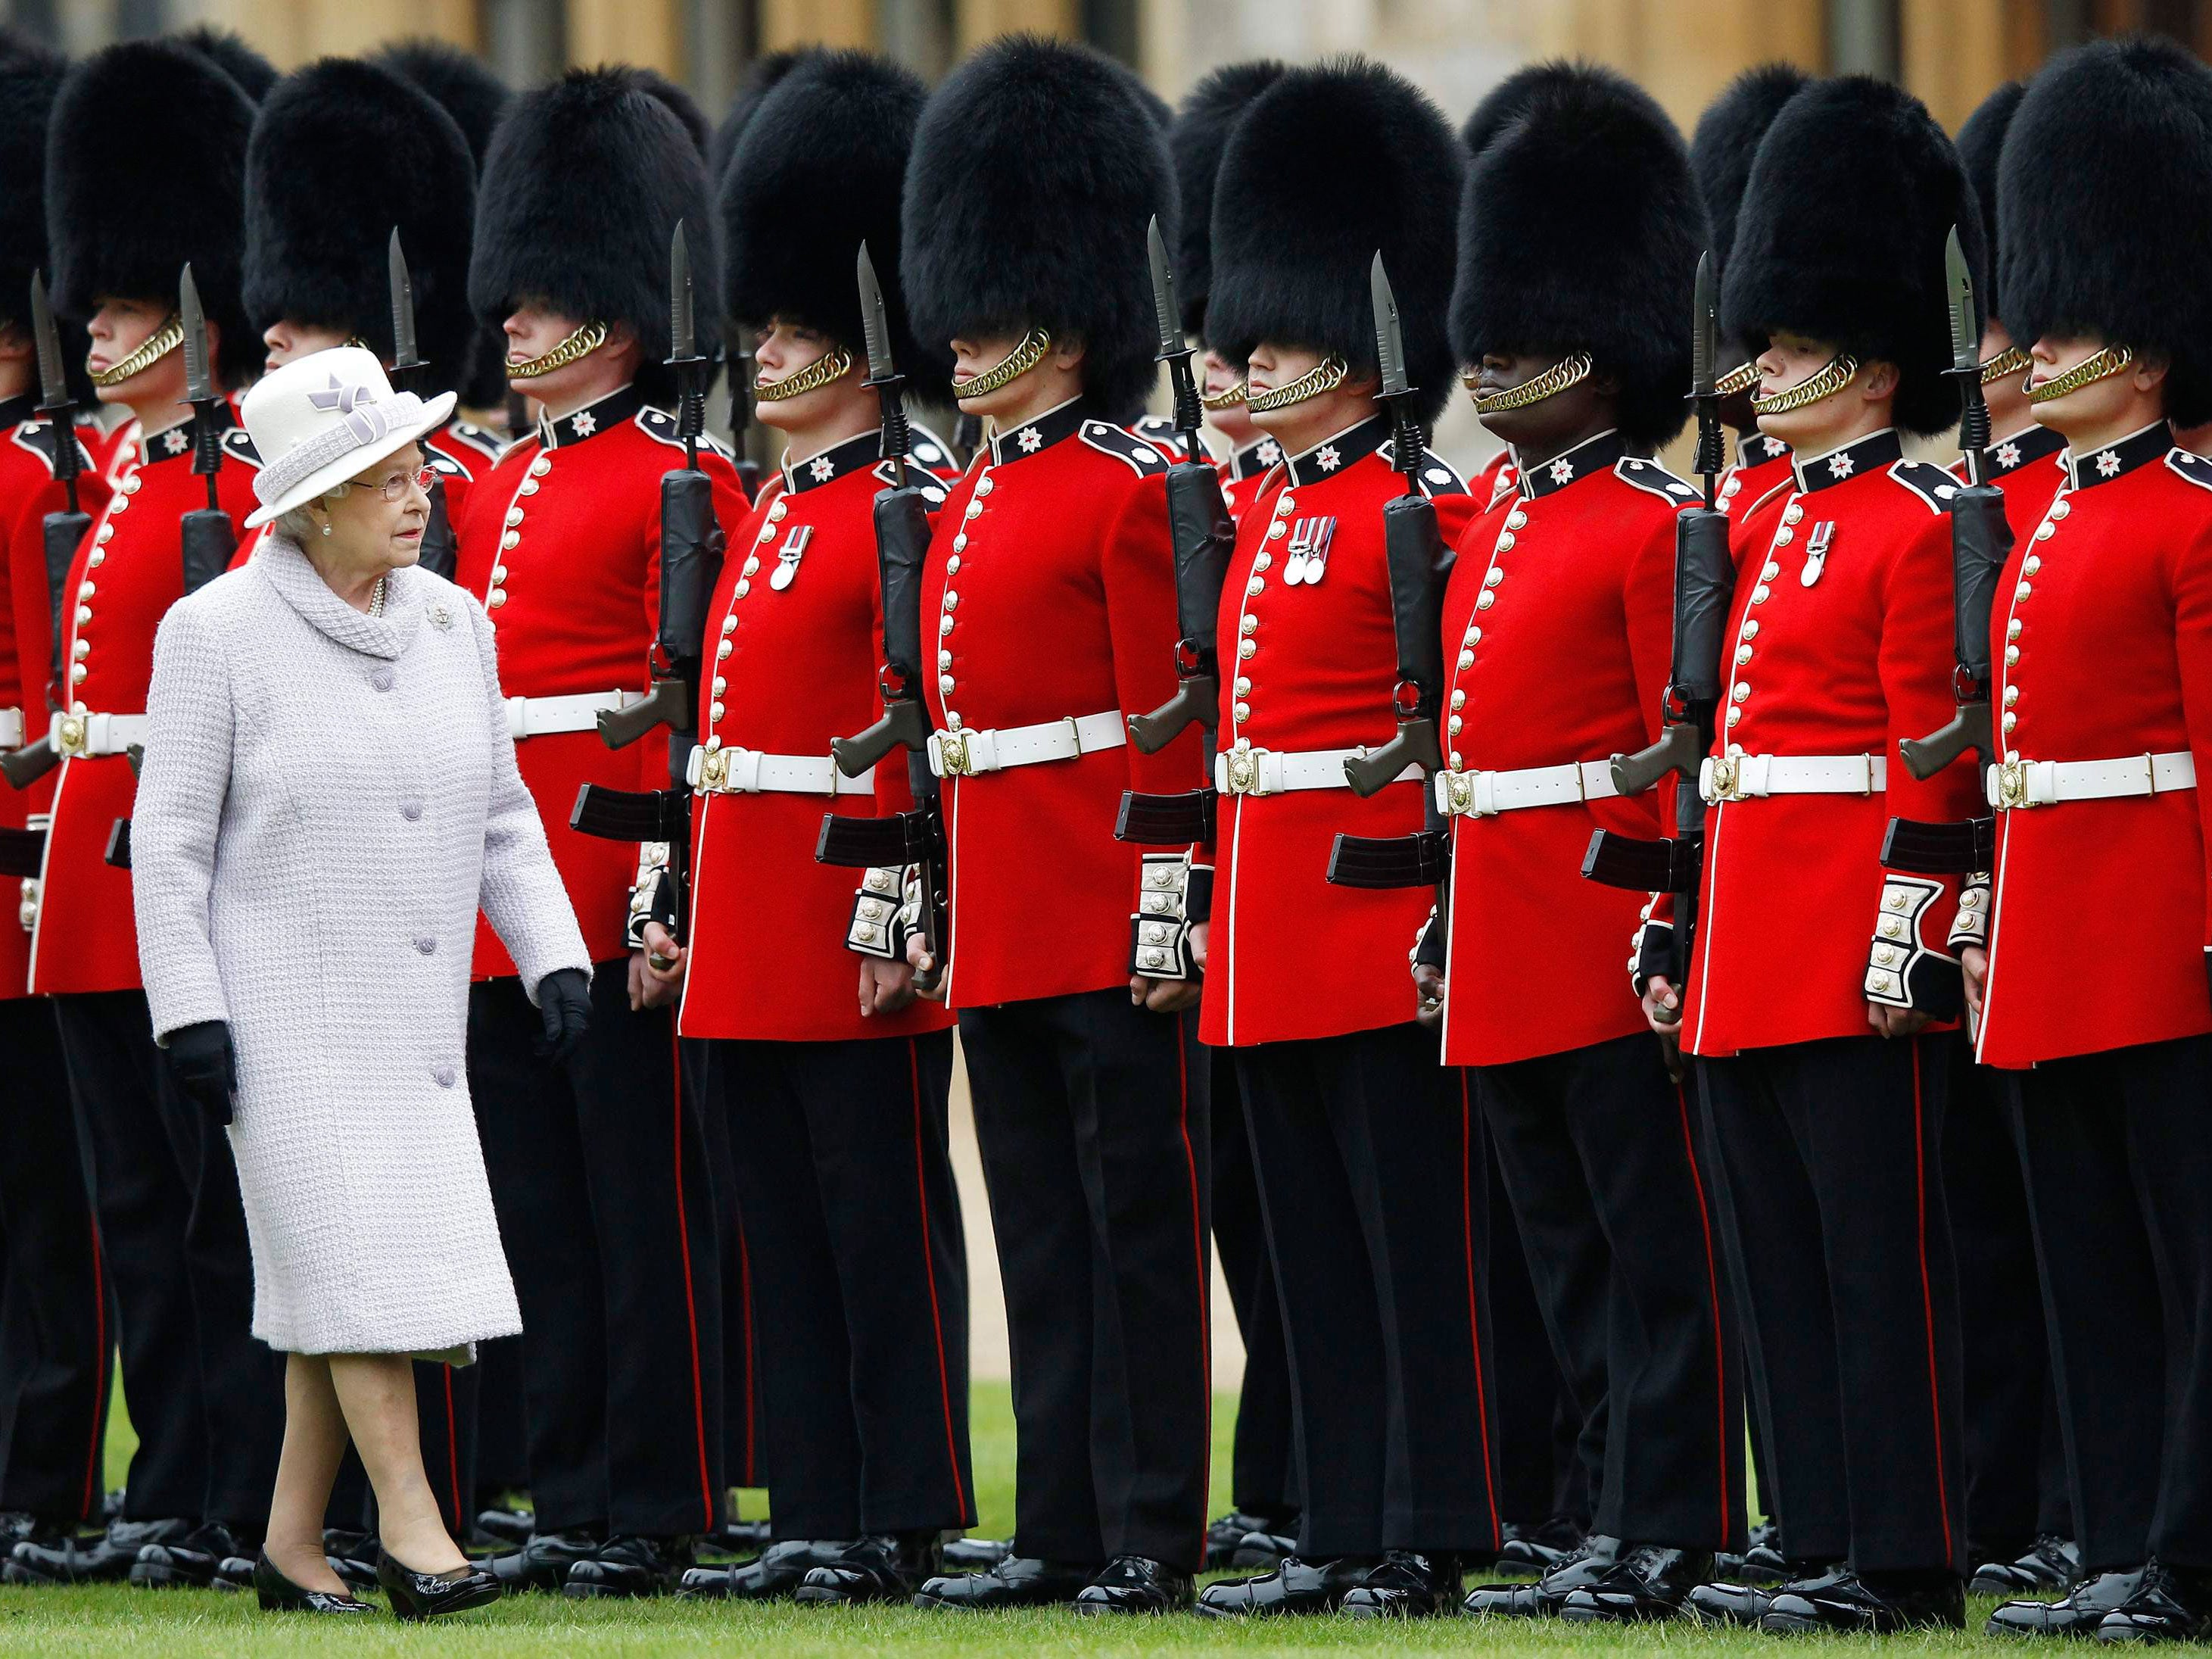 The Trooping of the Colour is an annual celebration marking the Queen's birthday, 2012